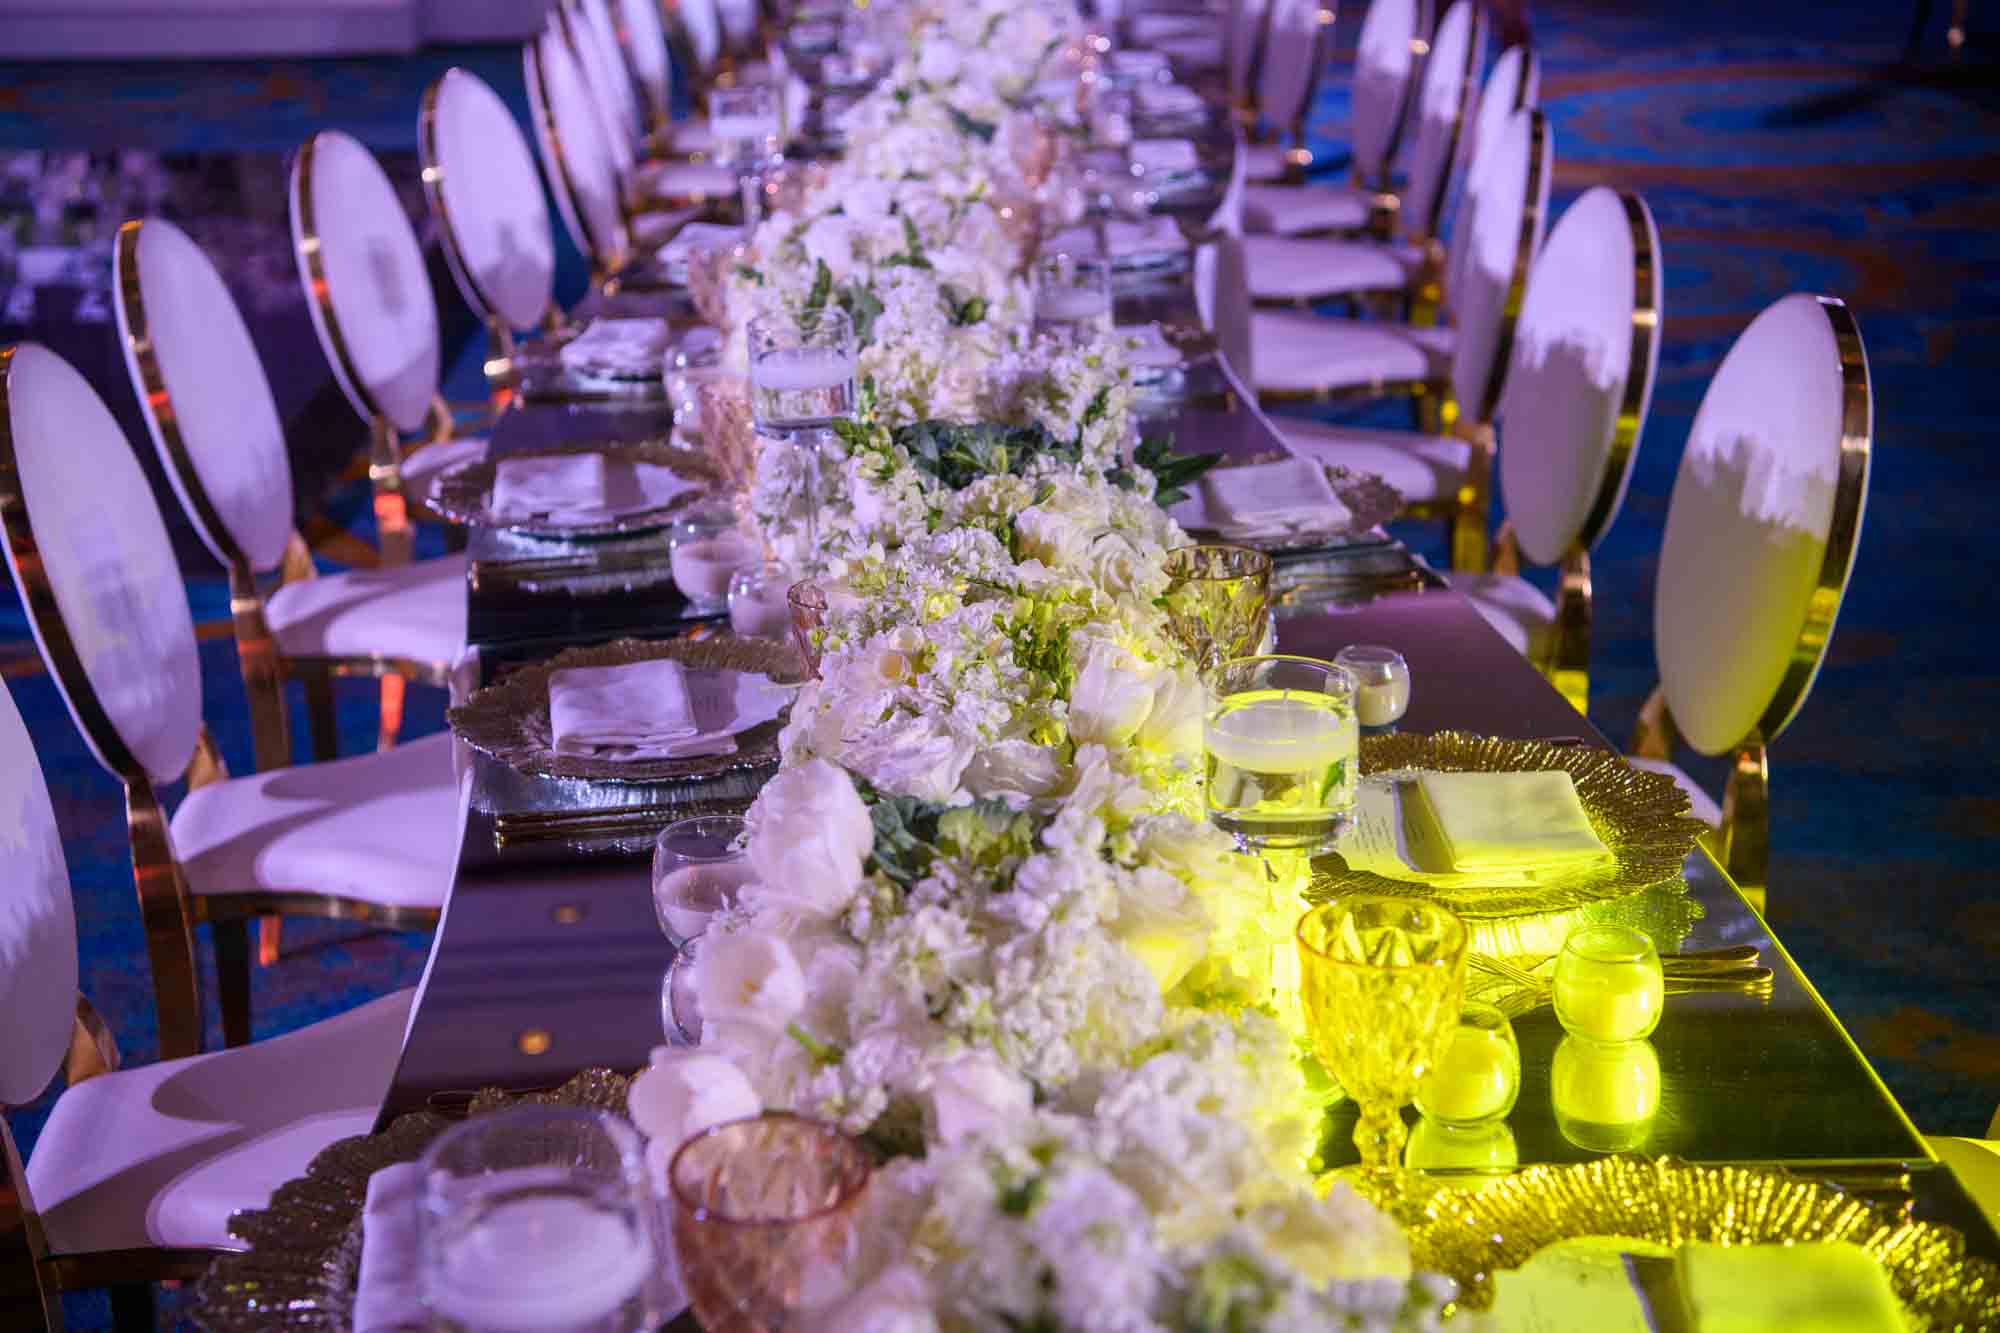 An elongated dining table adorned with white flowers, set for a wedding celebration.